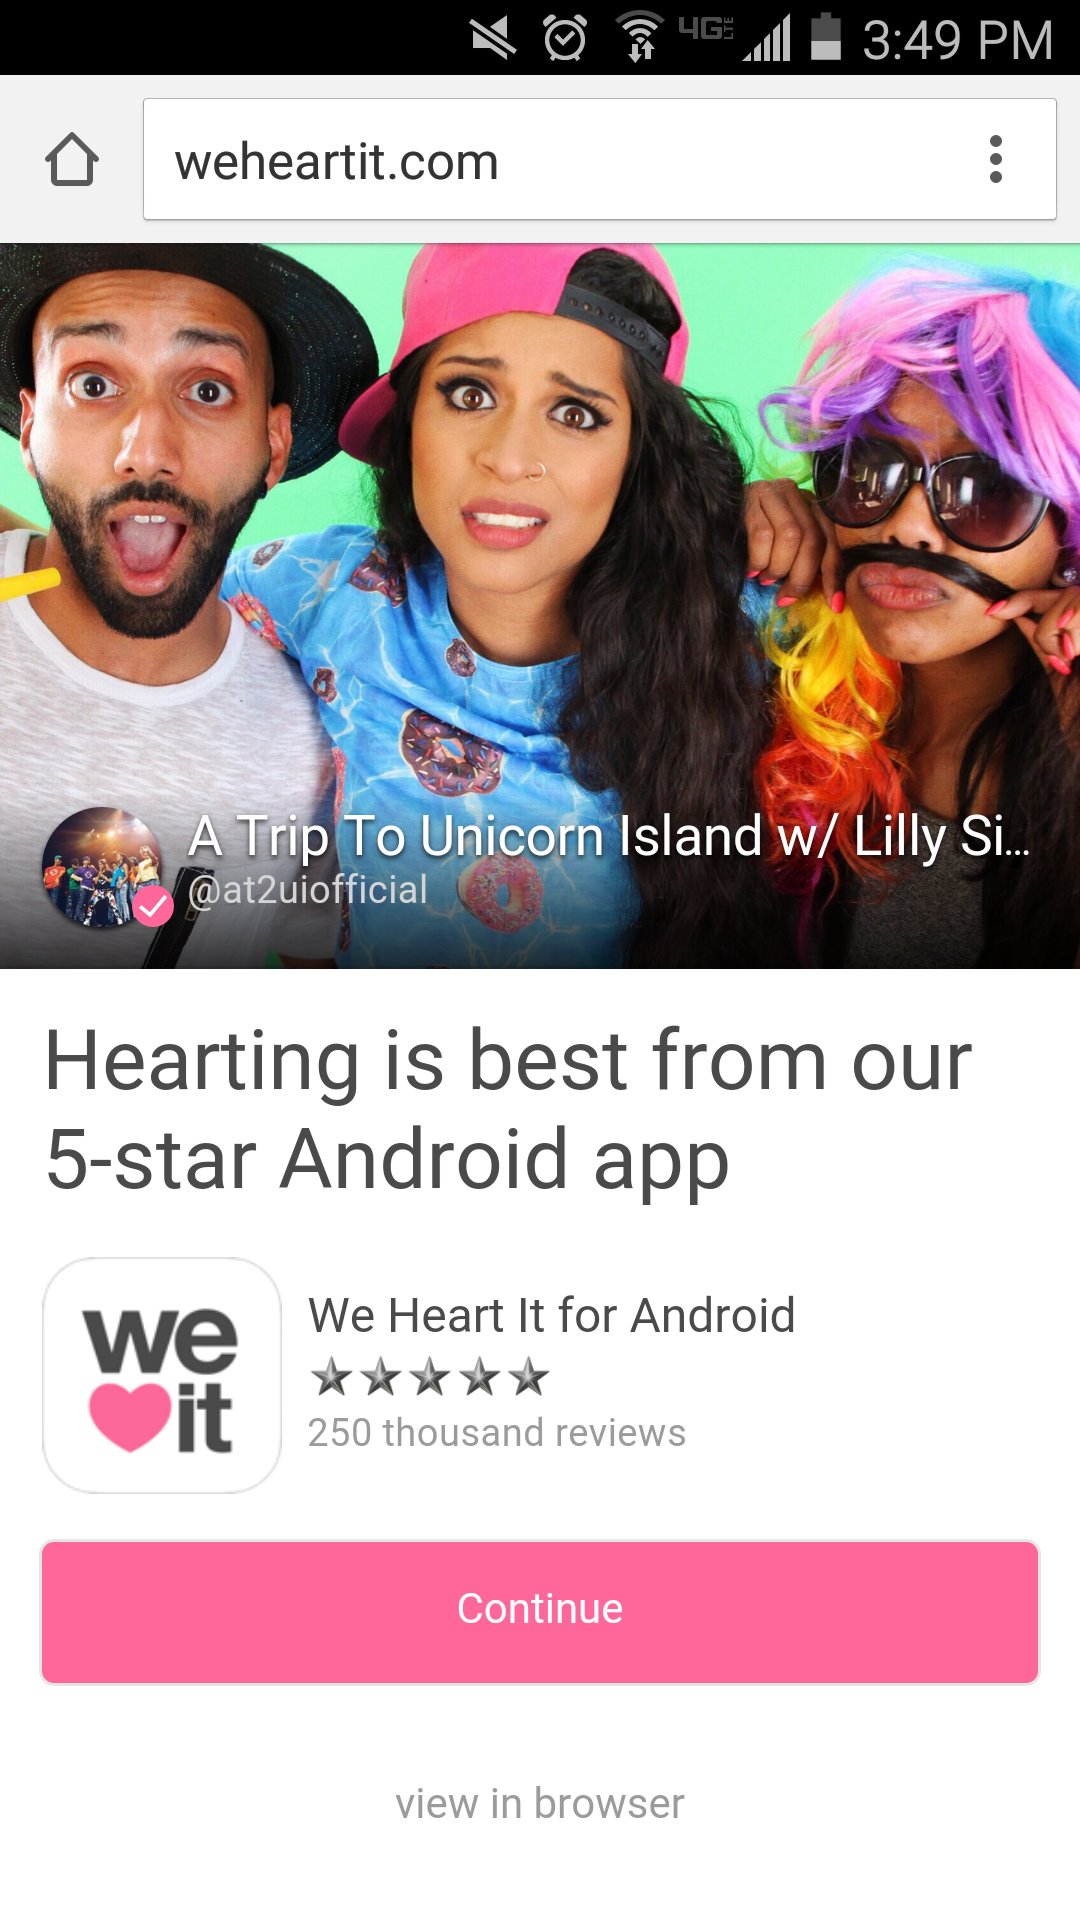 We Heart it Android Interstitial